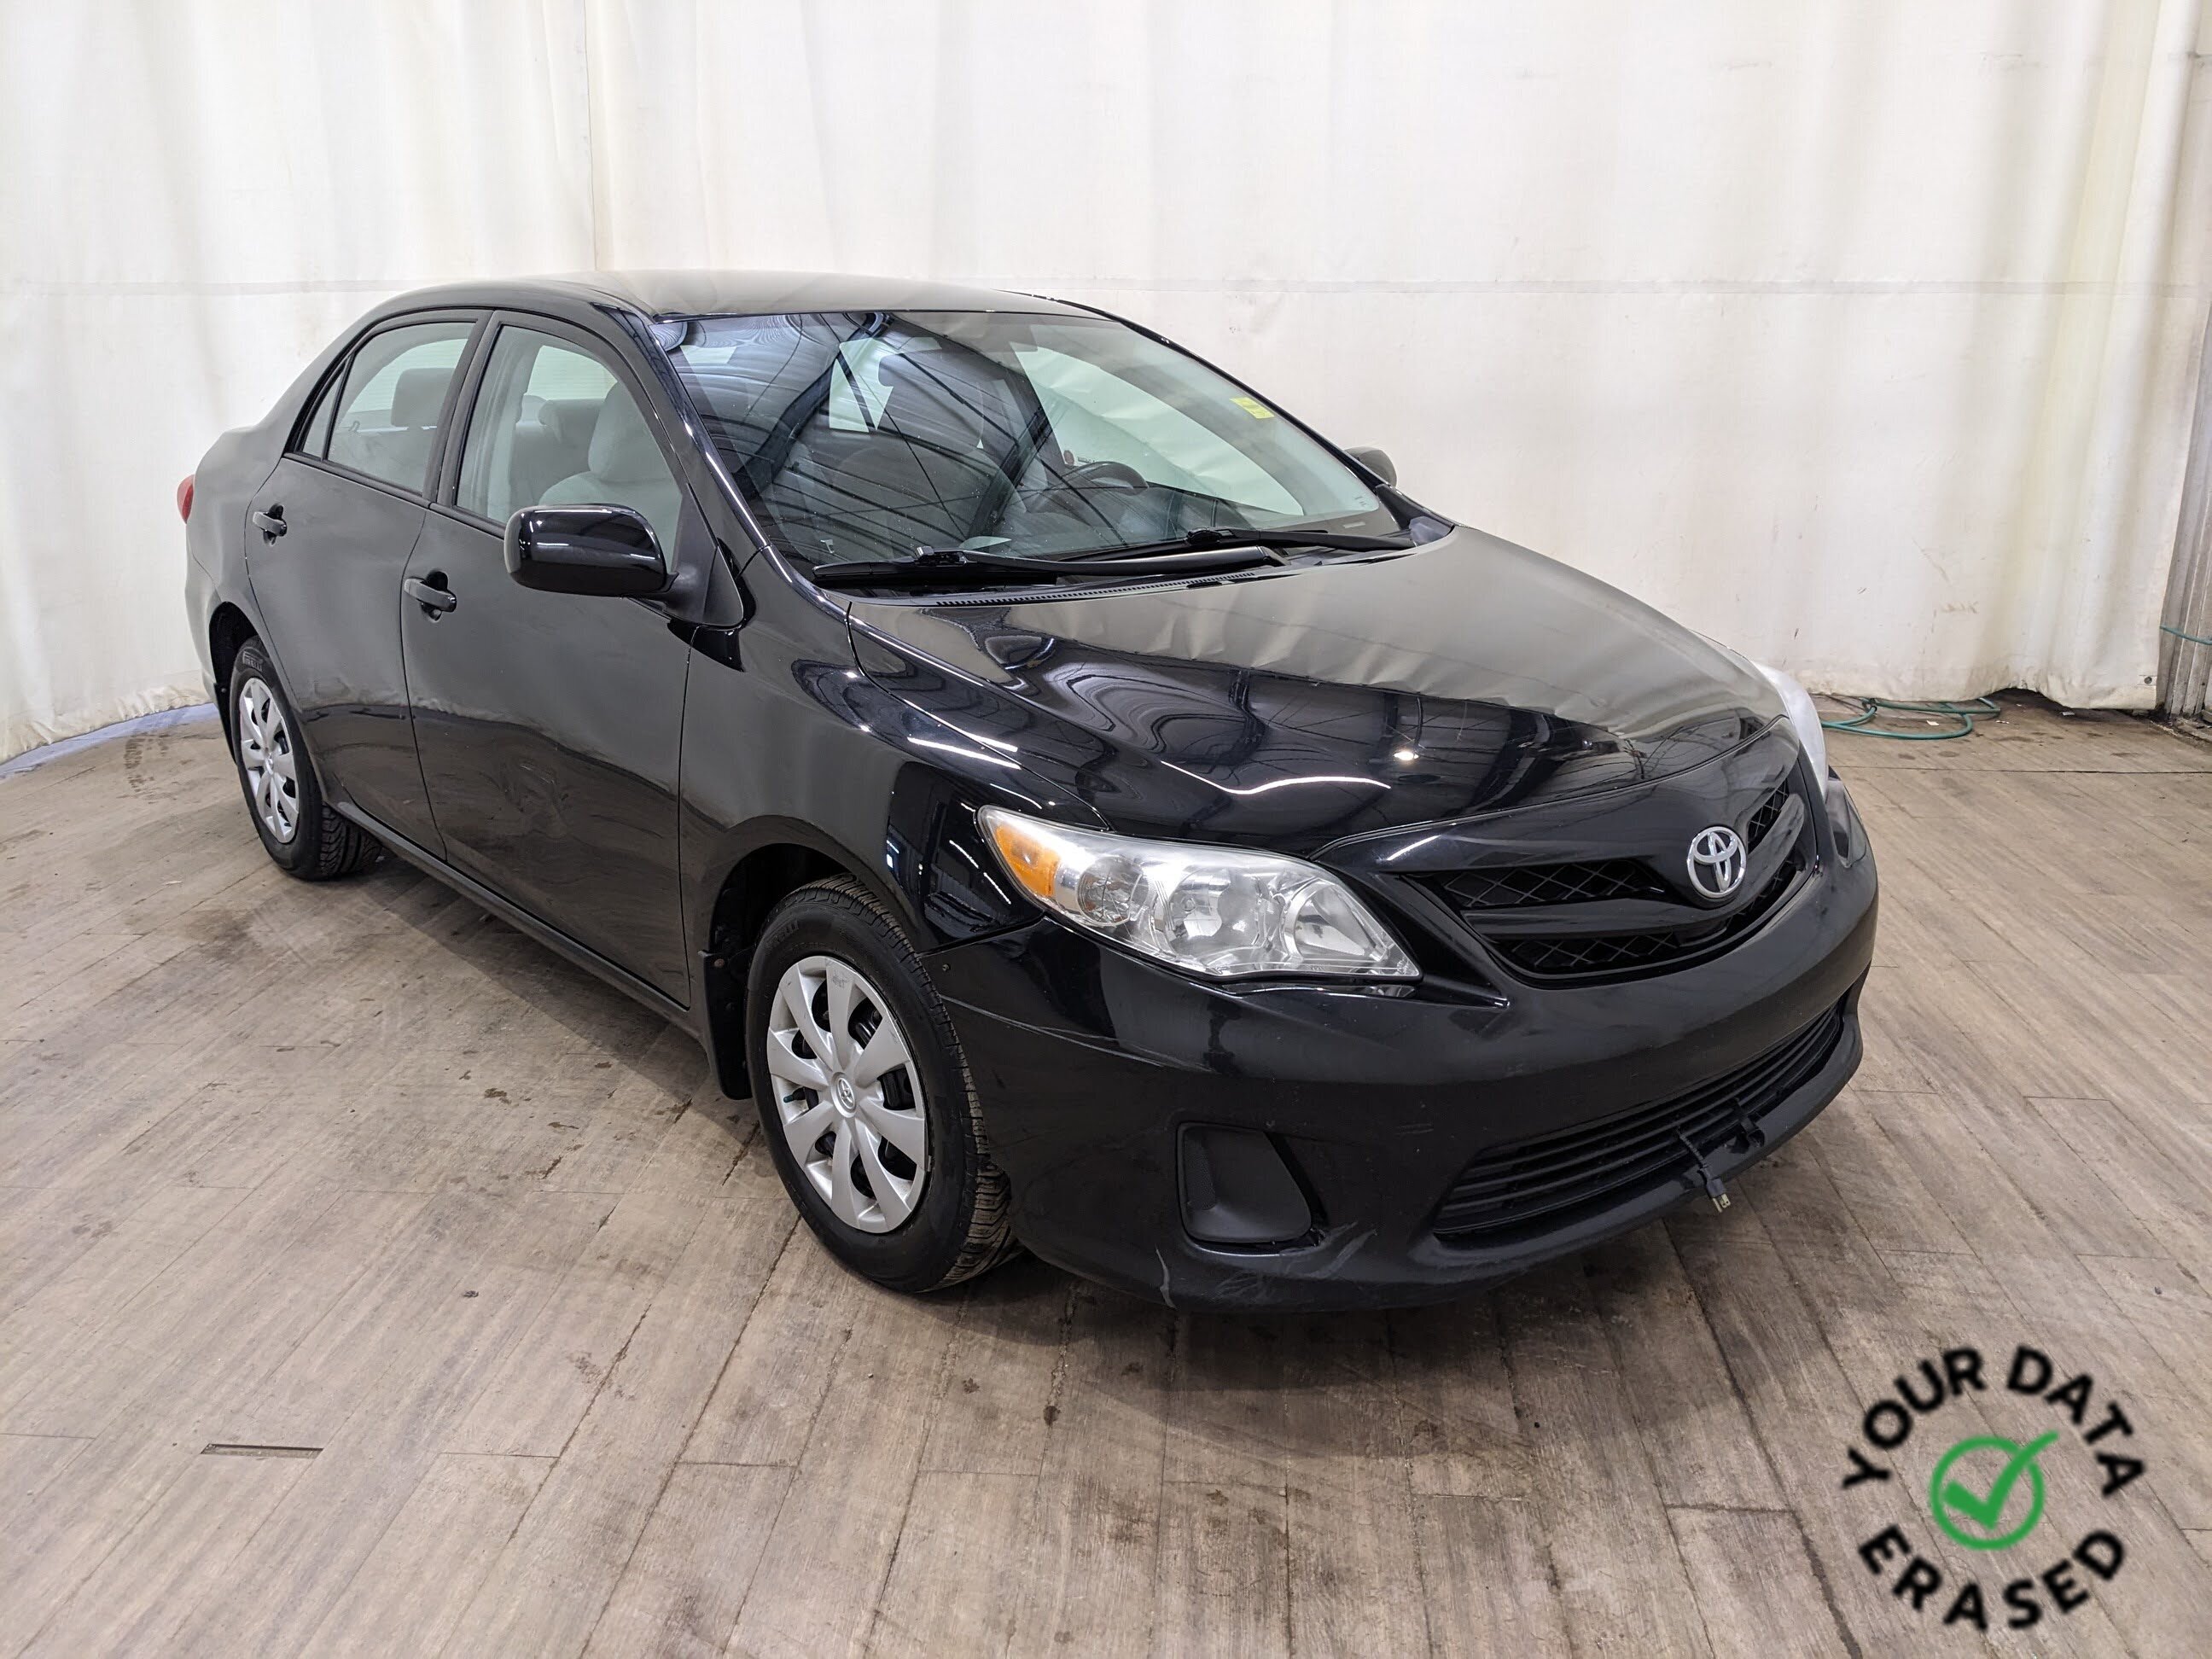 2013 Toyota Corolla CE |No Accidents | Manual Transmission | Bluetooth